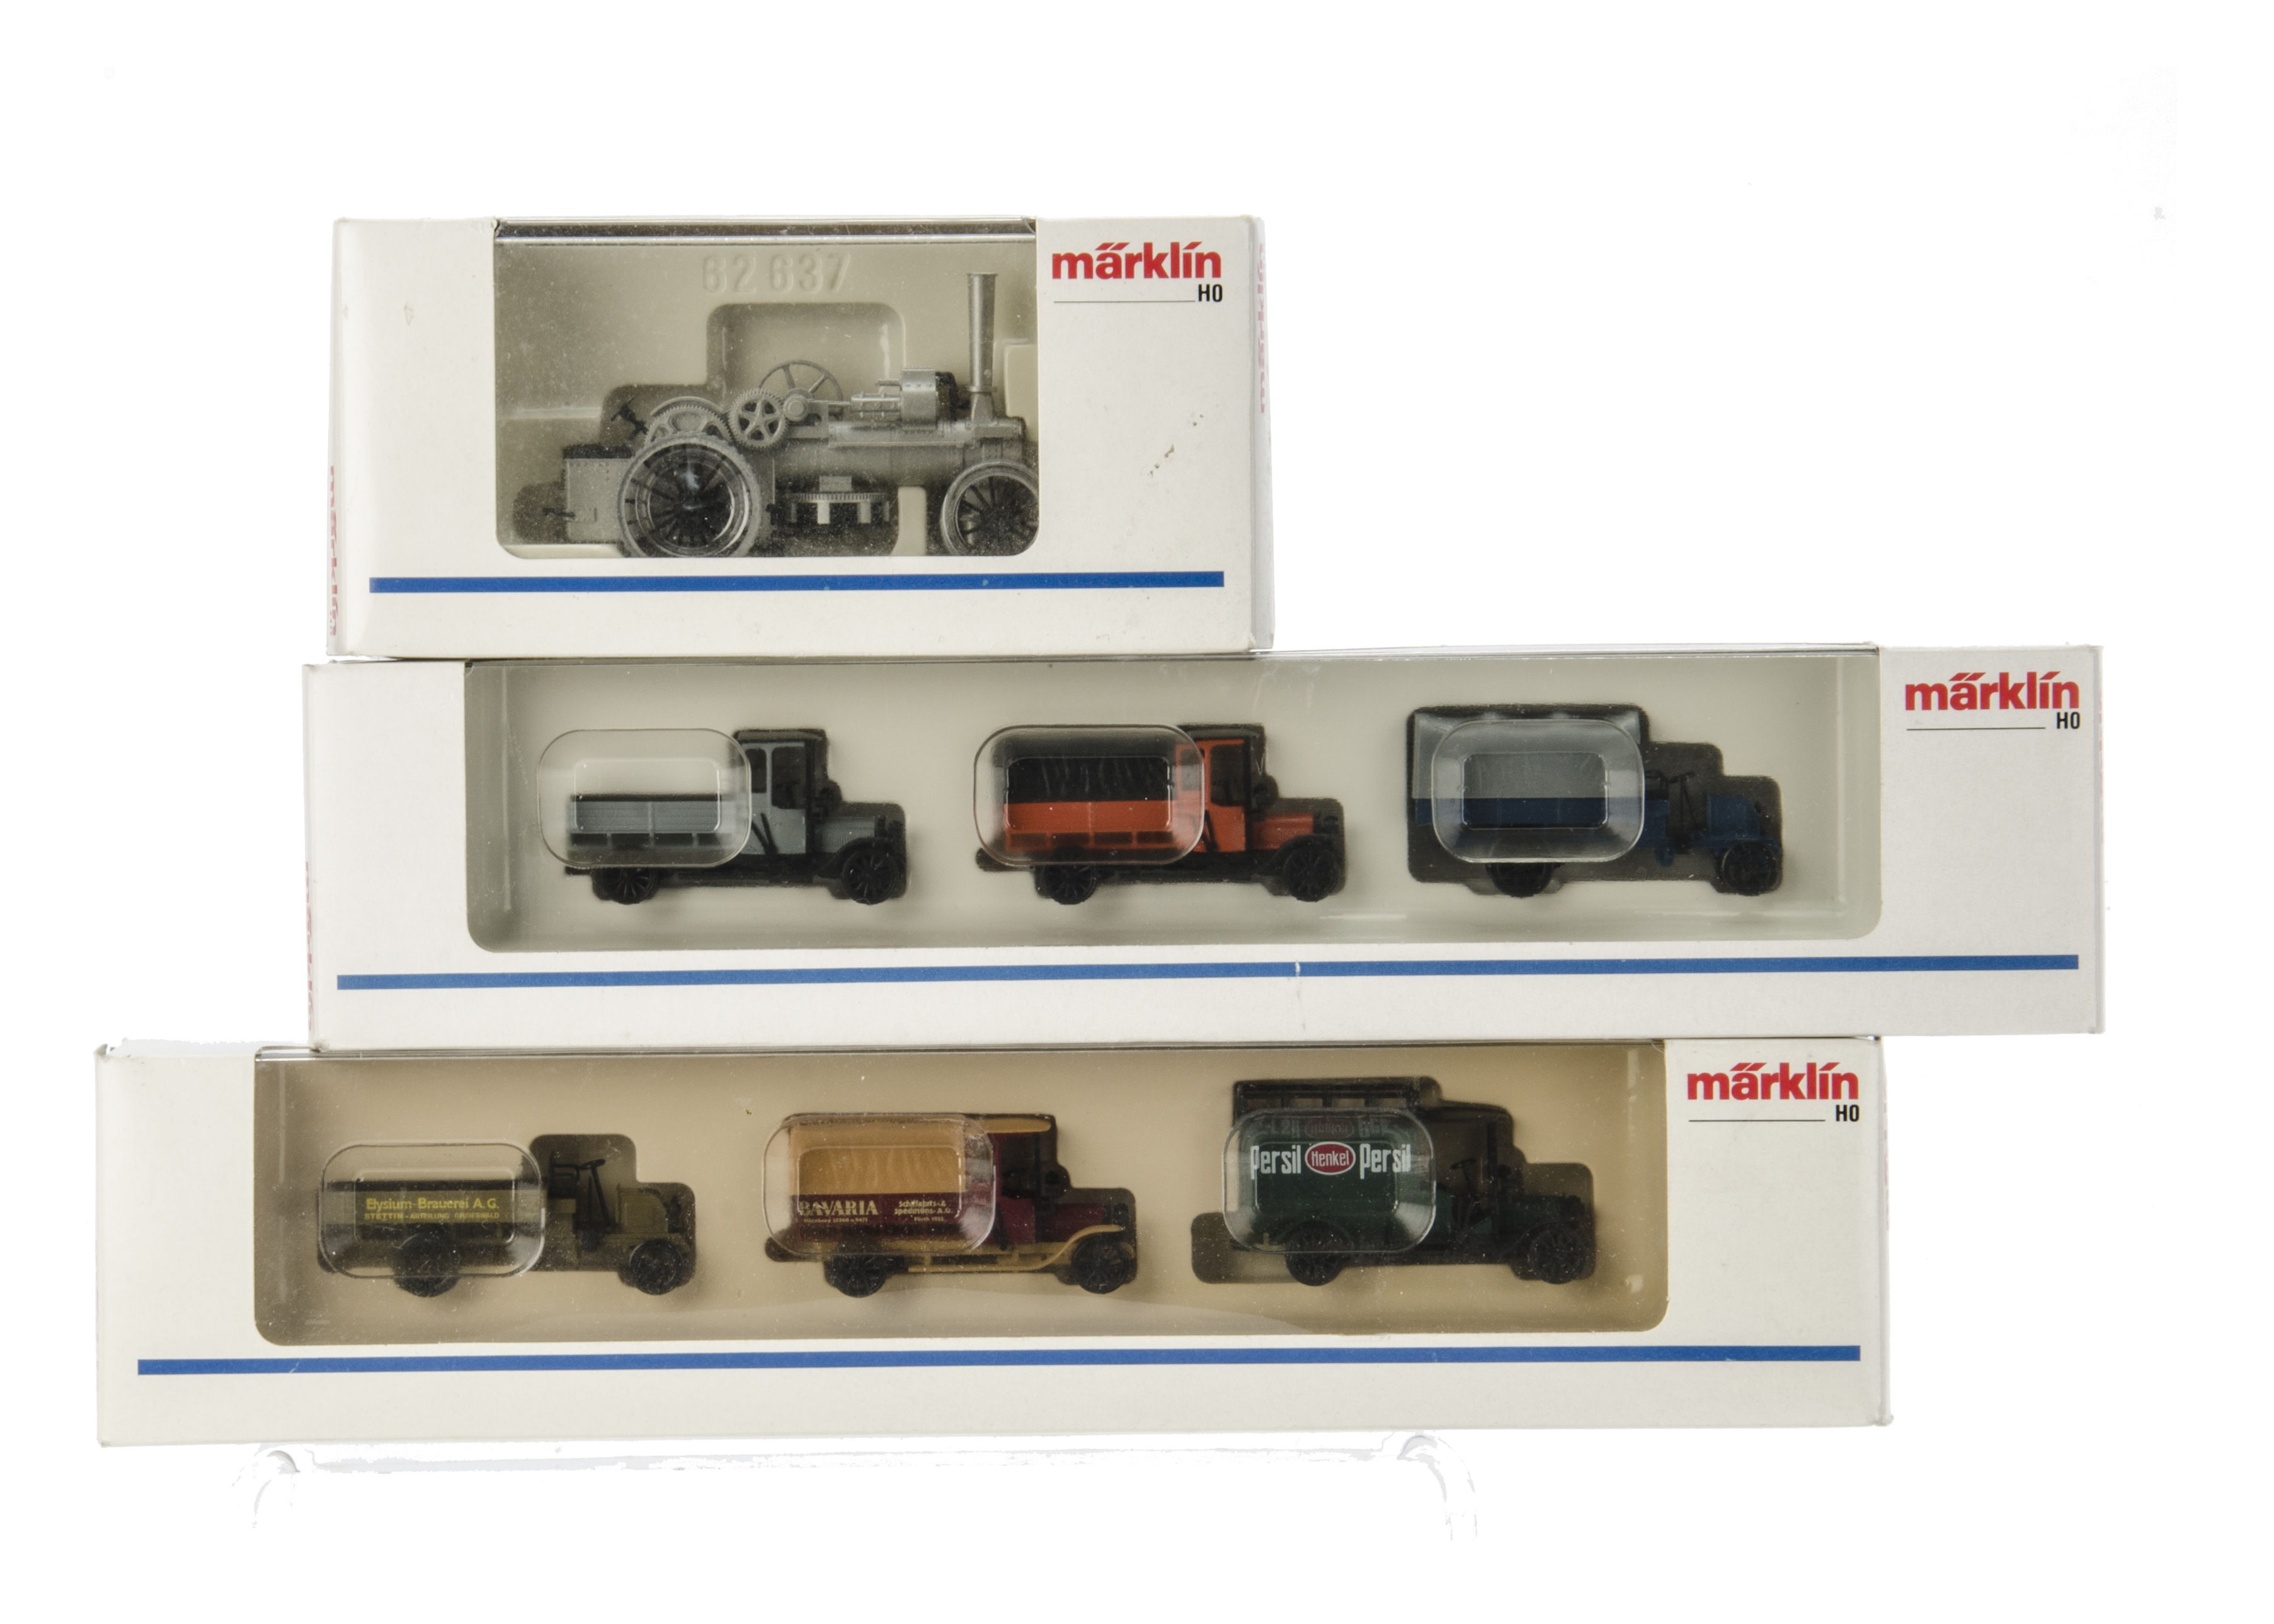 Marklin HO Gauge Road Vehicles ref 1894 & 1899 Advertising Vans and a ref 1896 traction engine, E,